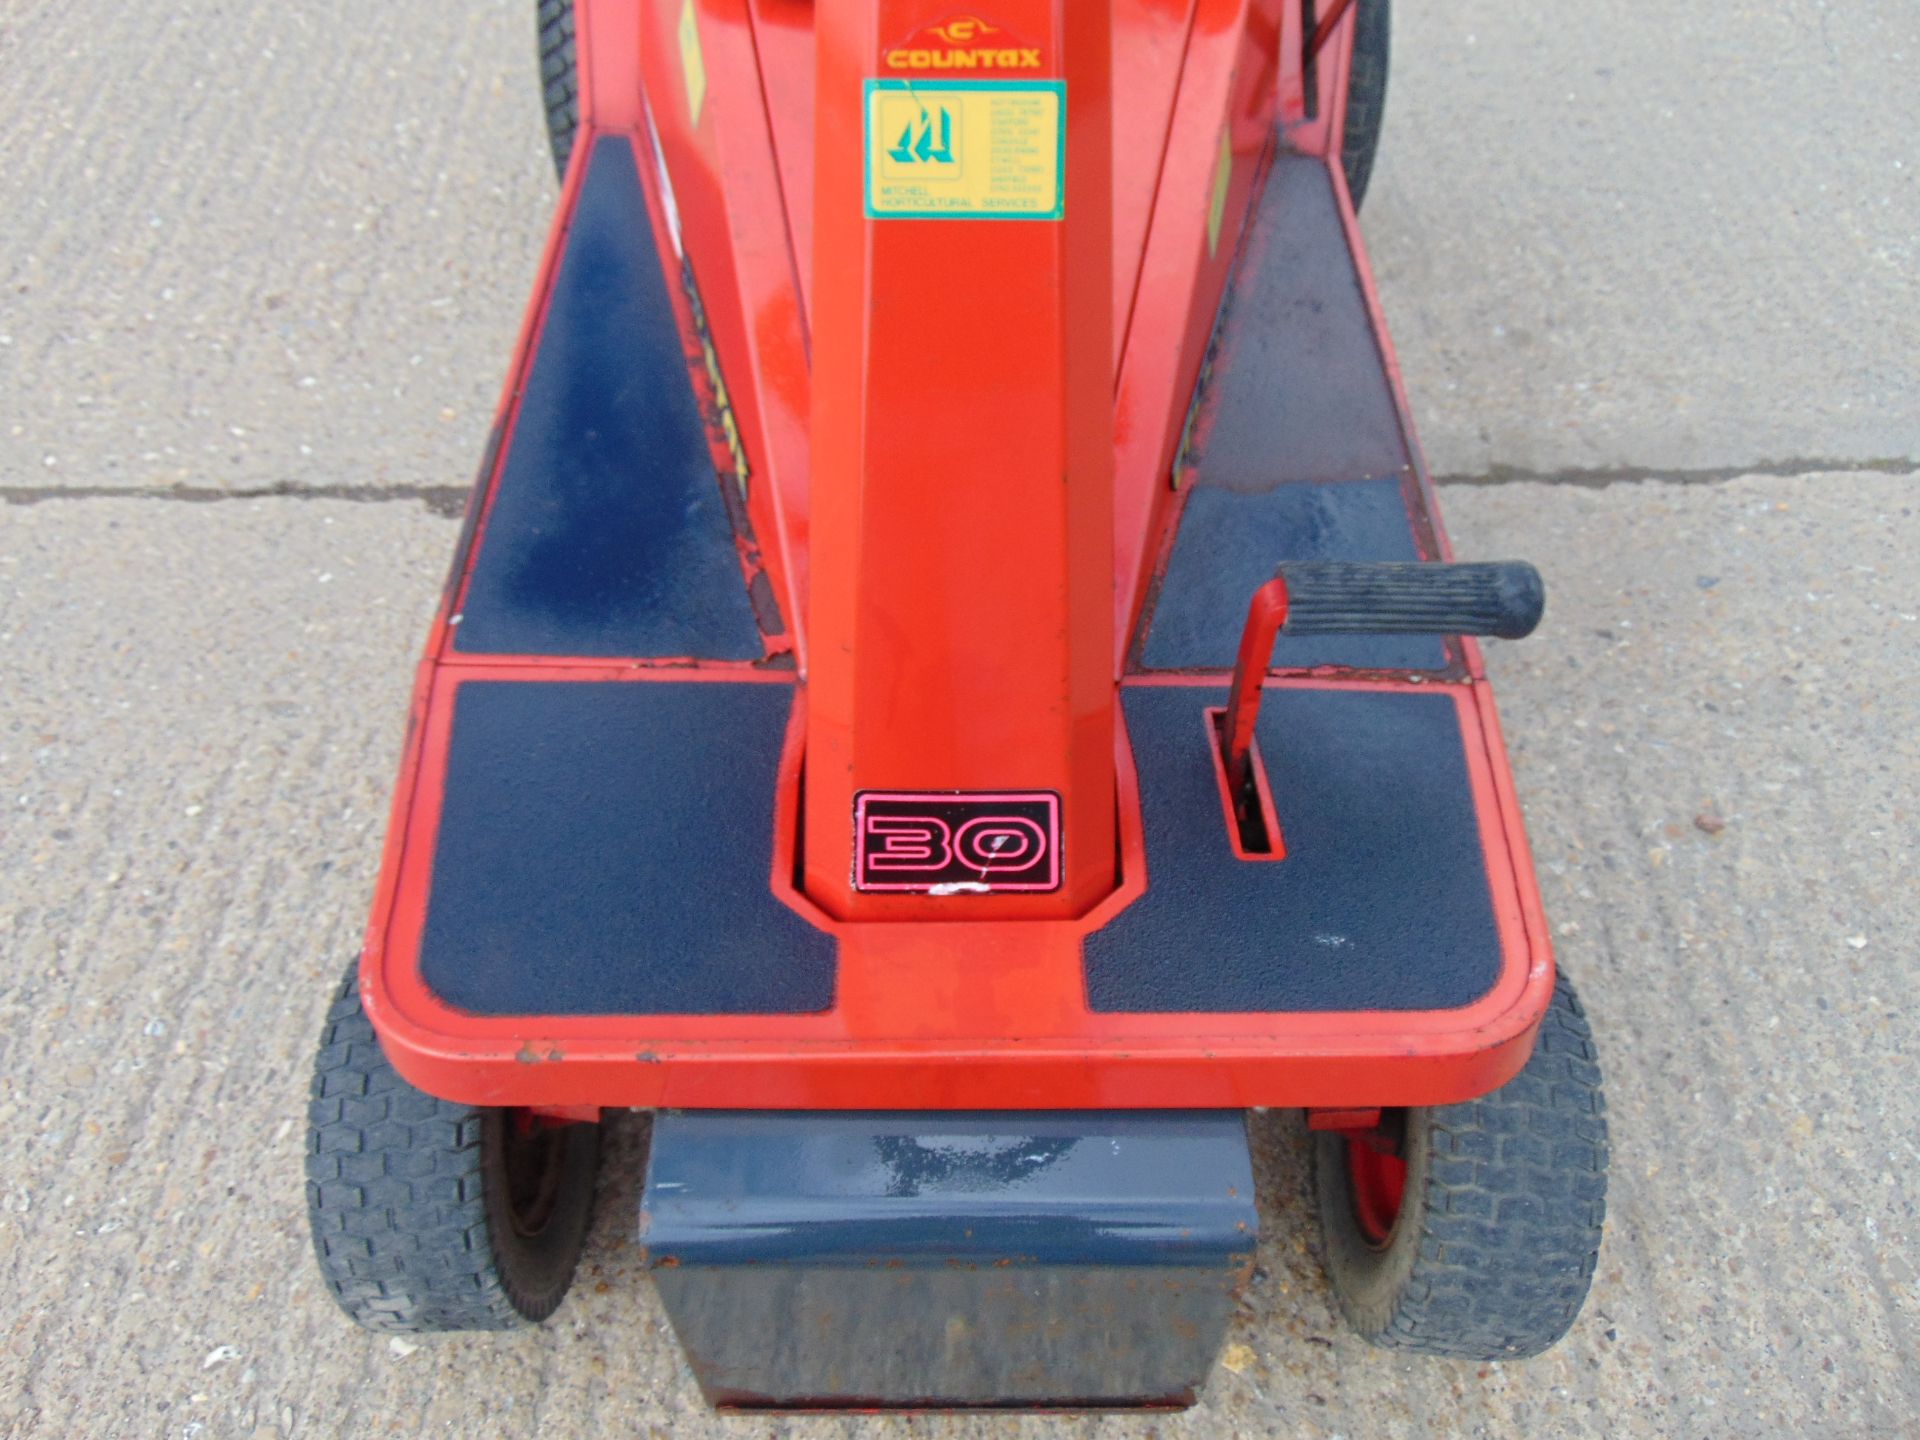 Countax Rider 30 Ride On Mower - Image 8 of 11